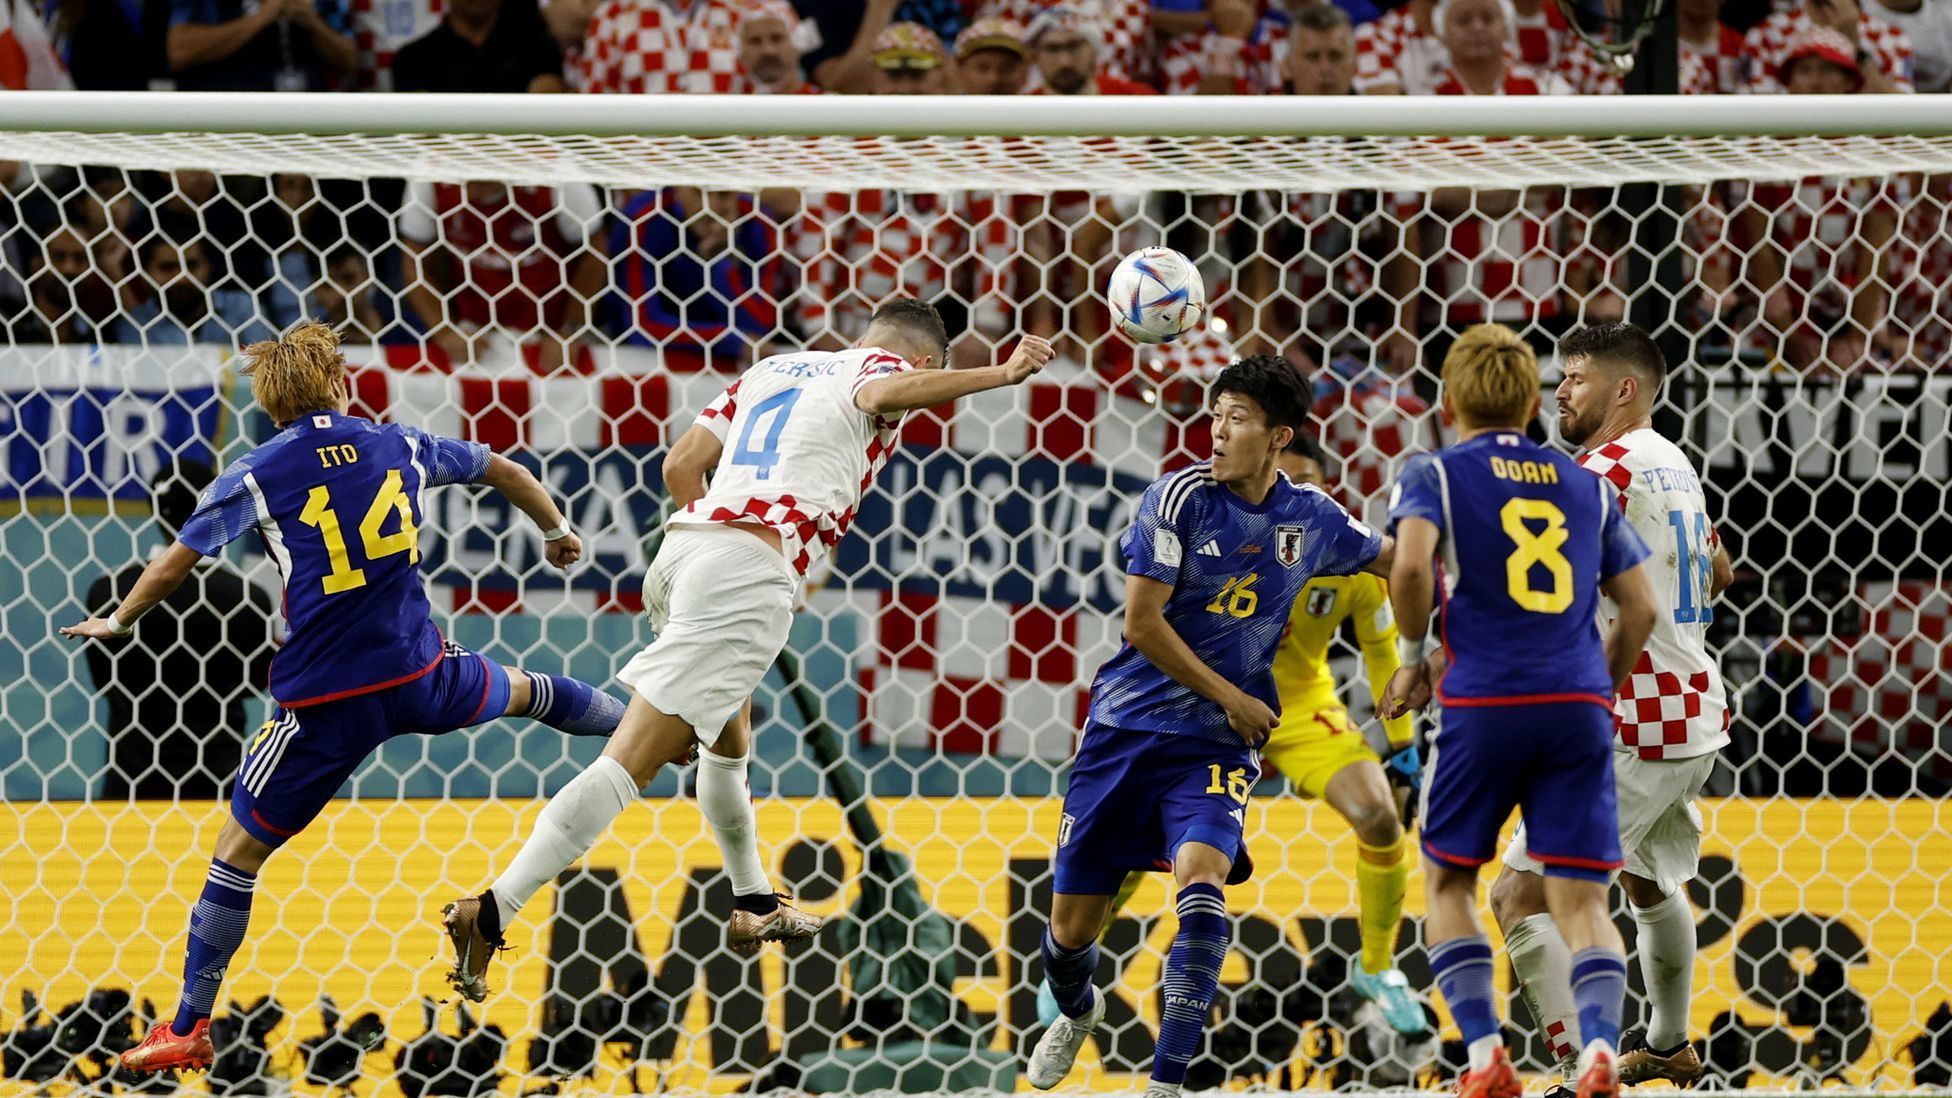 Croatia defeats Japan in a penalty shootout to advance to the quarterfinals of World Cup 2022